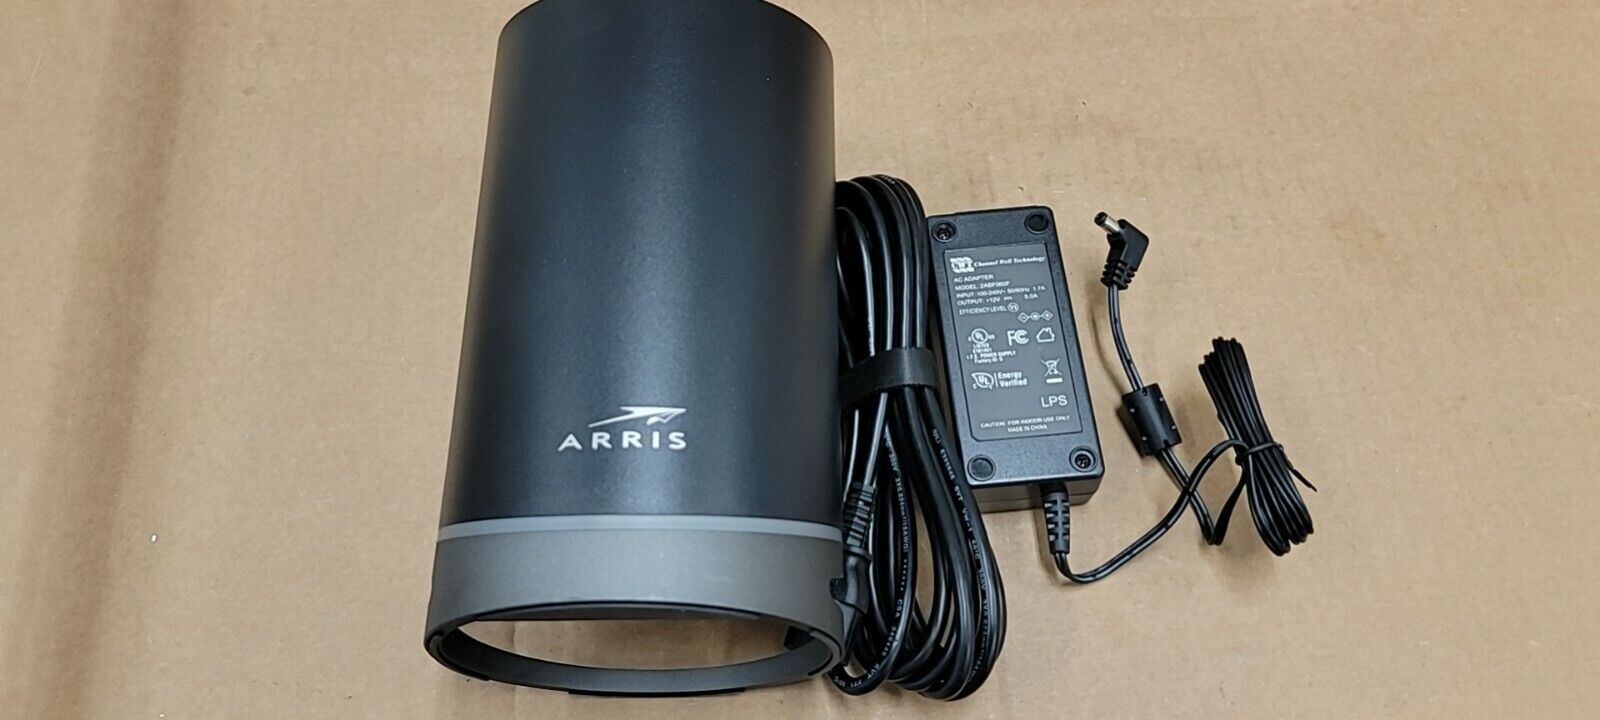 ARRIS SURFboard mAX Pro W31 Wireless-AX Tri-Band Router | at Great Condition